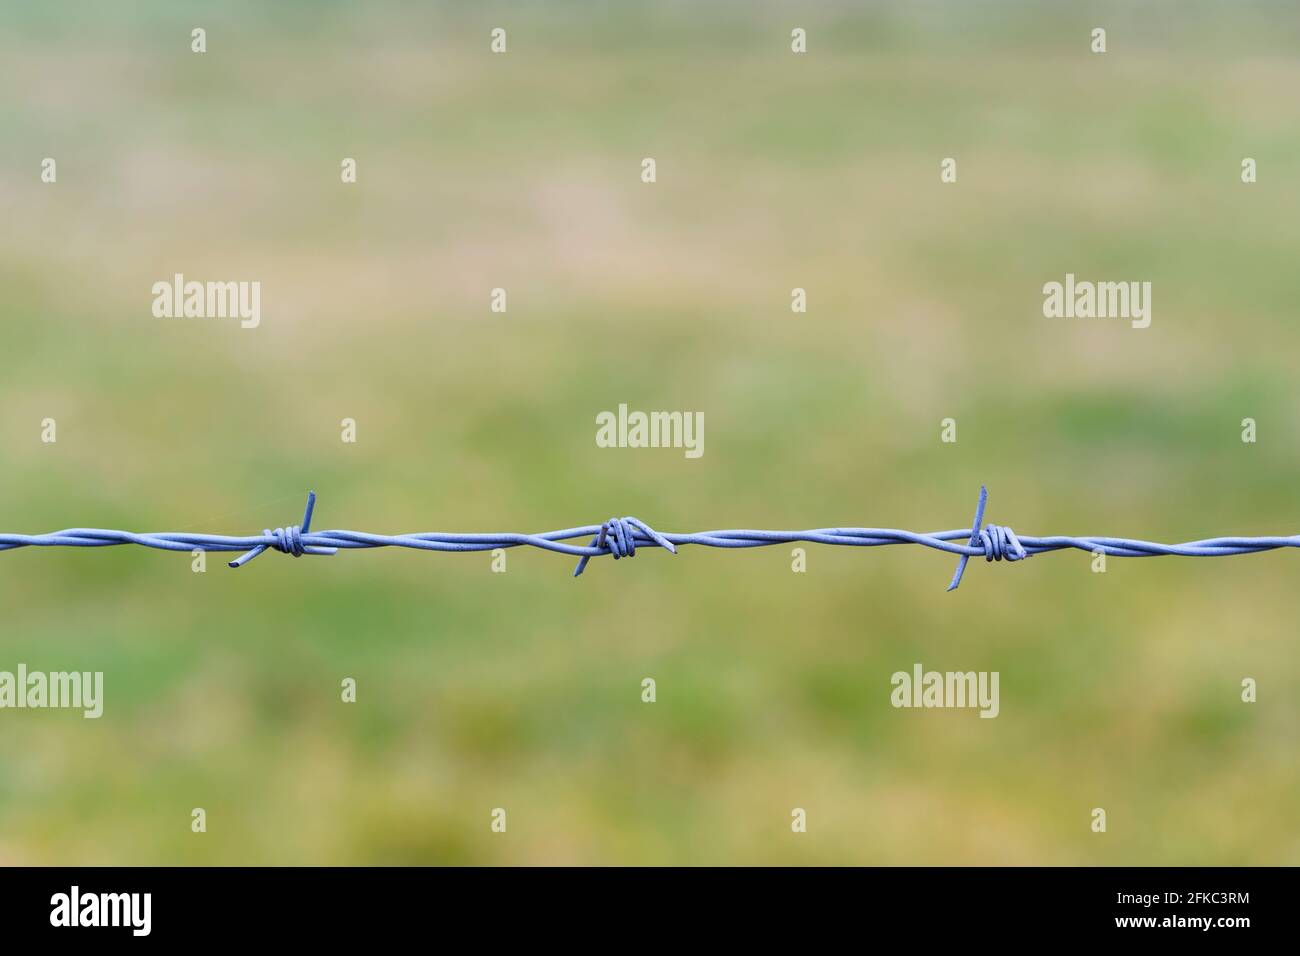 String of barbed wire fencing against a blurred green background Stock Photo